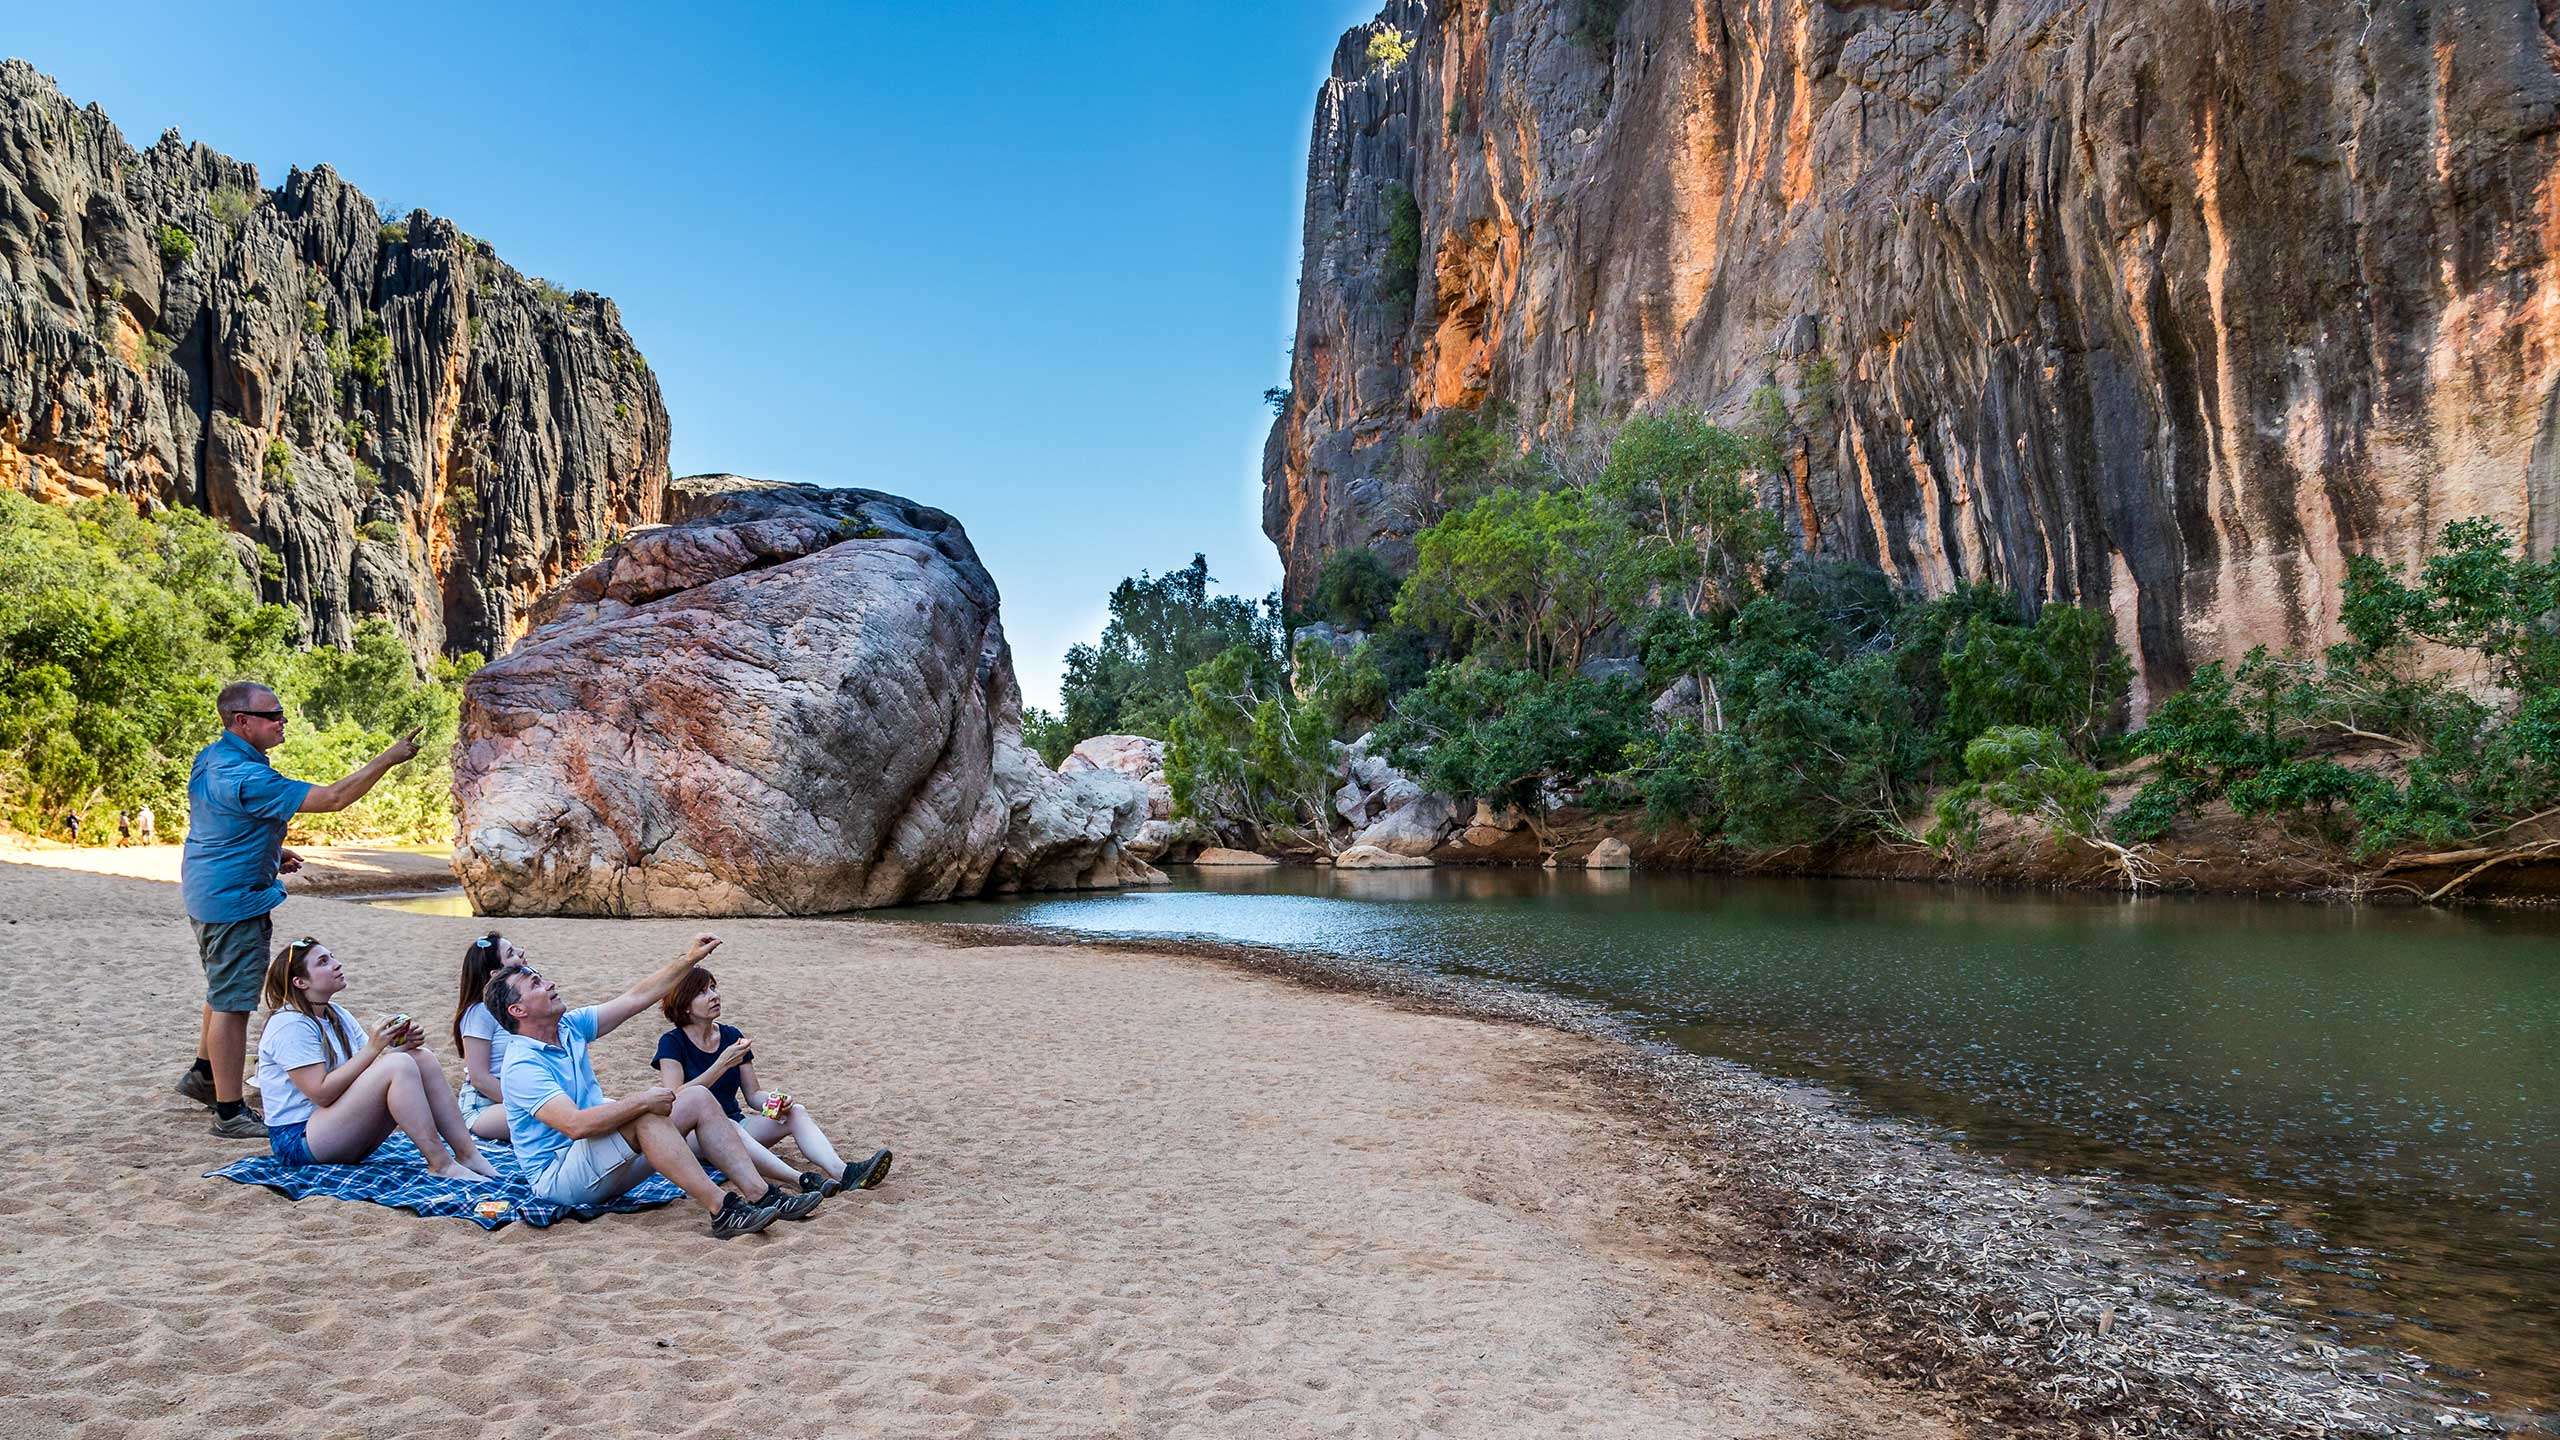 Wild Kimberley West Camping Adventure 6D5N, Fully Guided